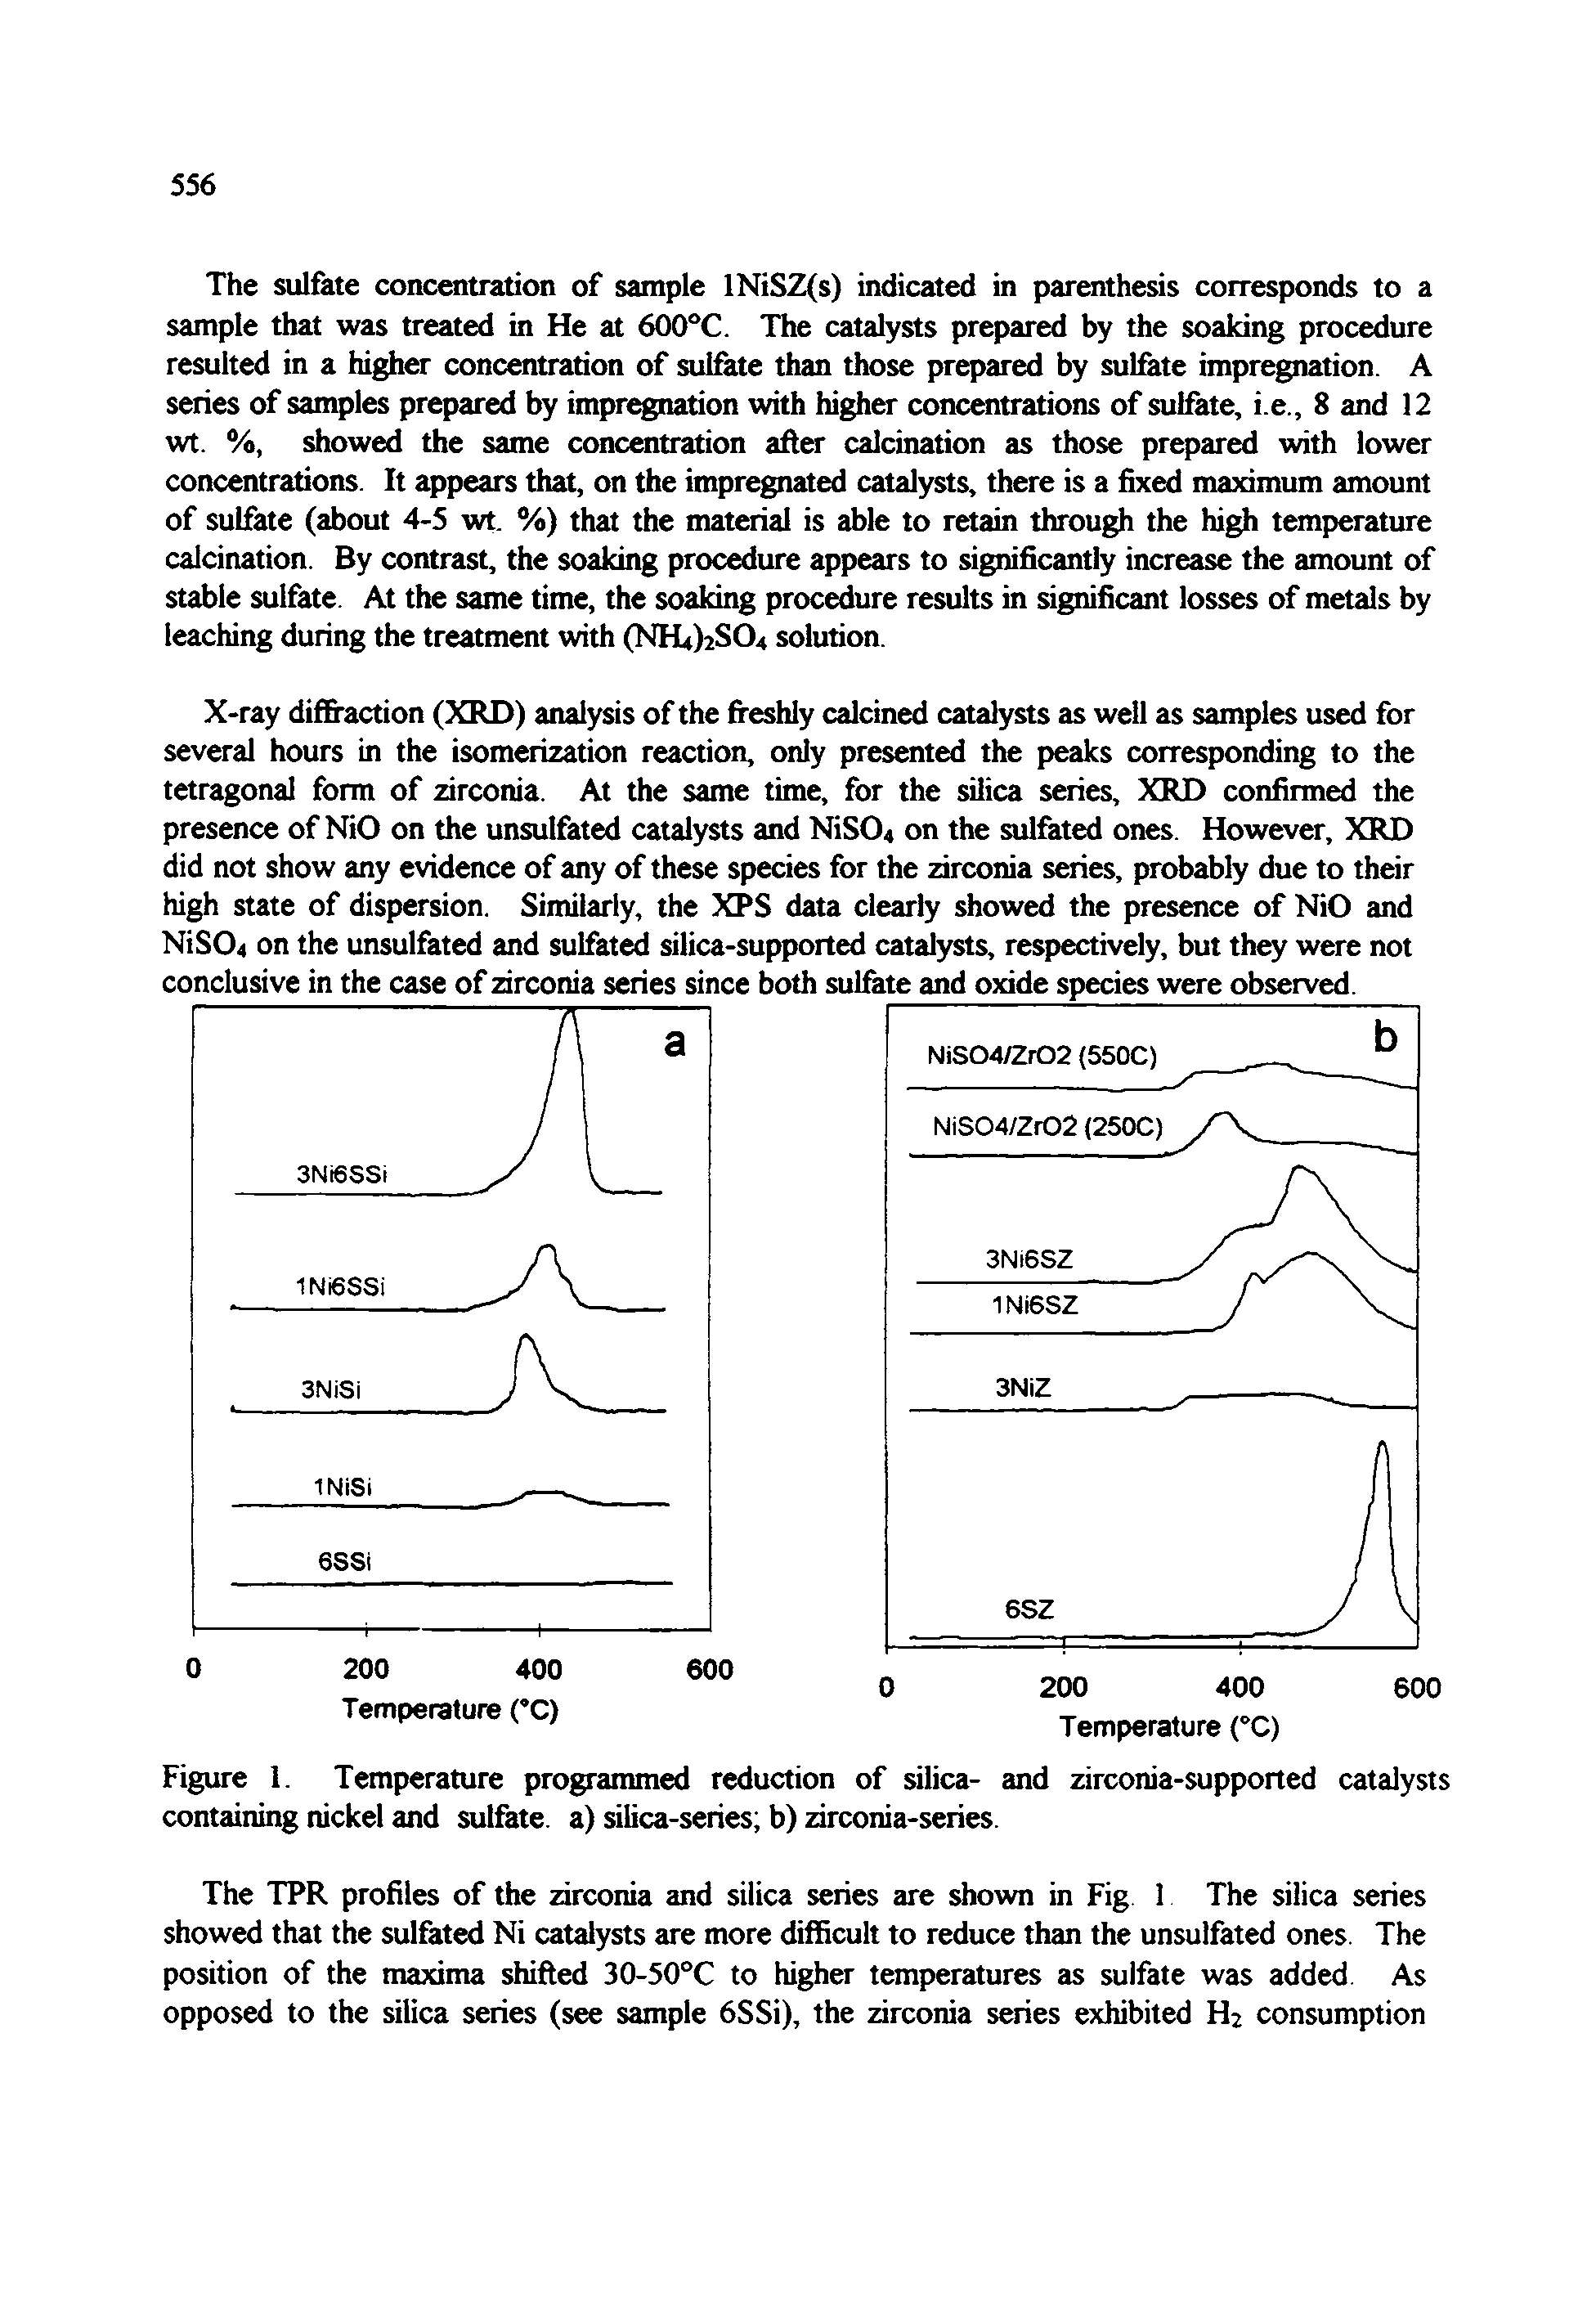 Figure 1. Temperature prograimned reduction of silica- and zirconia-supported catalysts containing nickel and sulfate, a) silica-series b) zirconia-series.